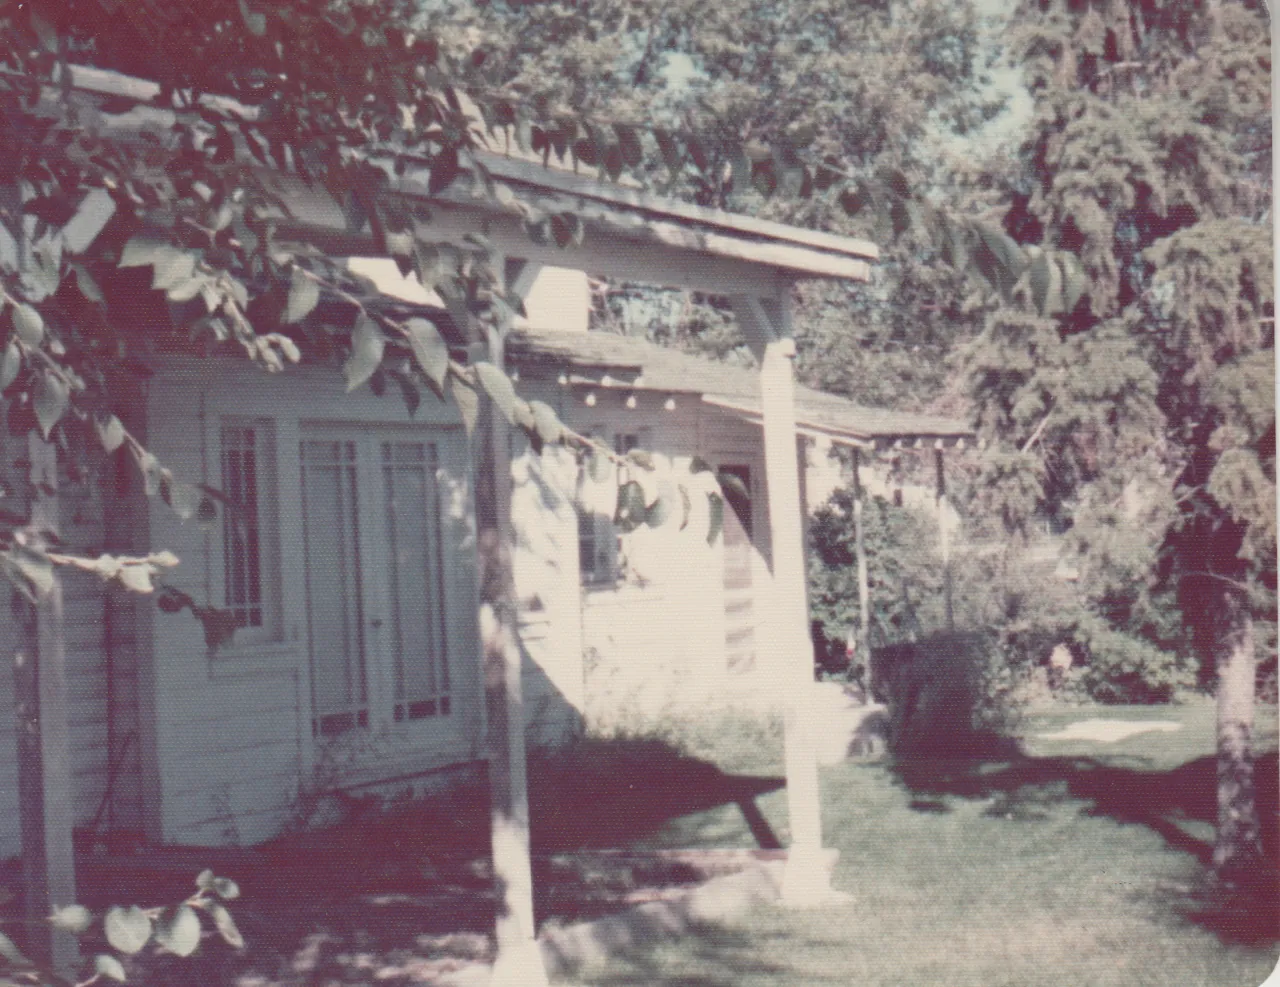 1974-09 - White house, outside, evergreen trees, dated September of 1974, 2pics-2.png